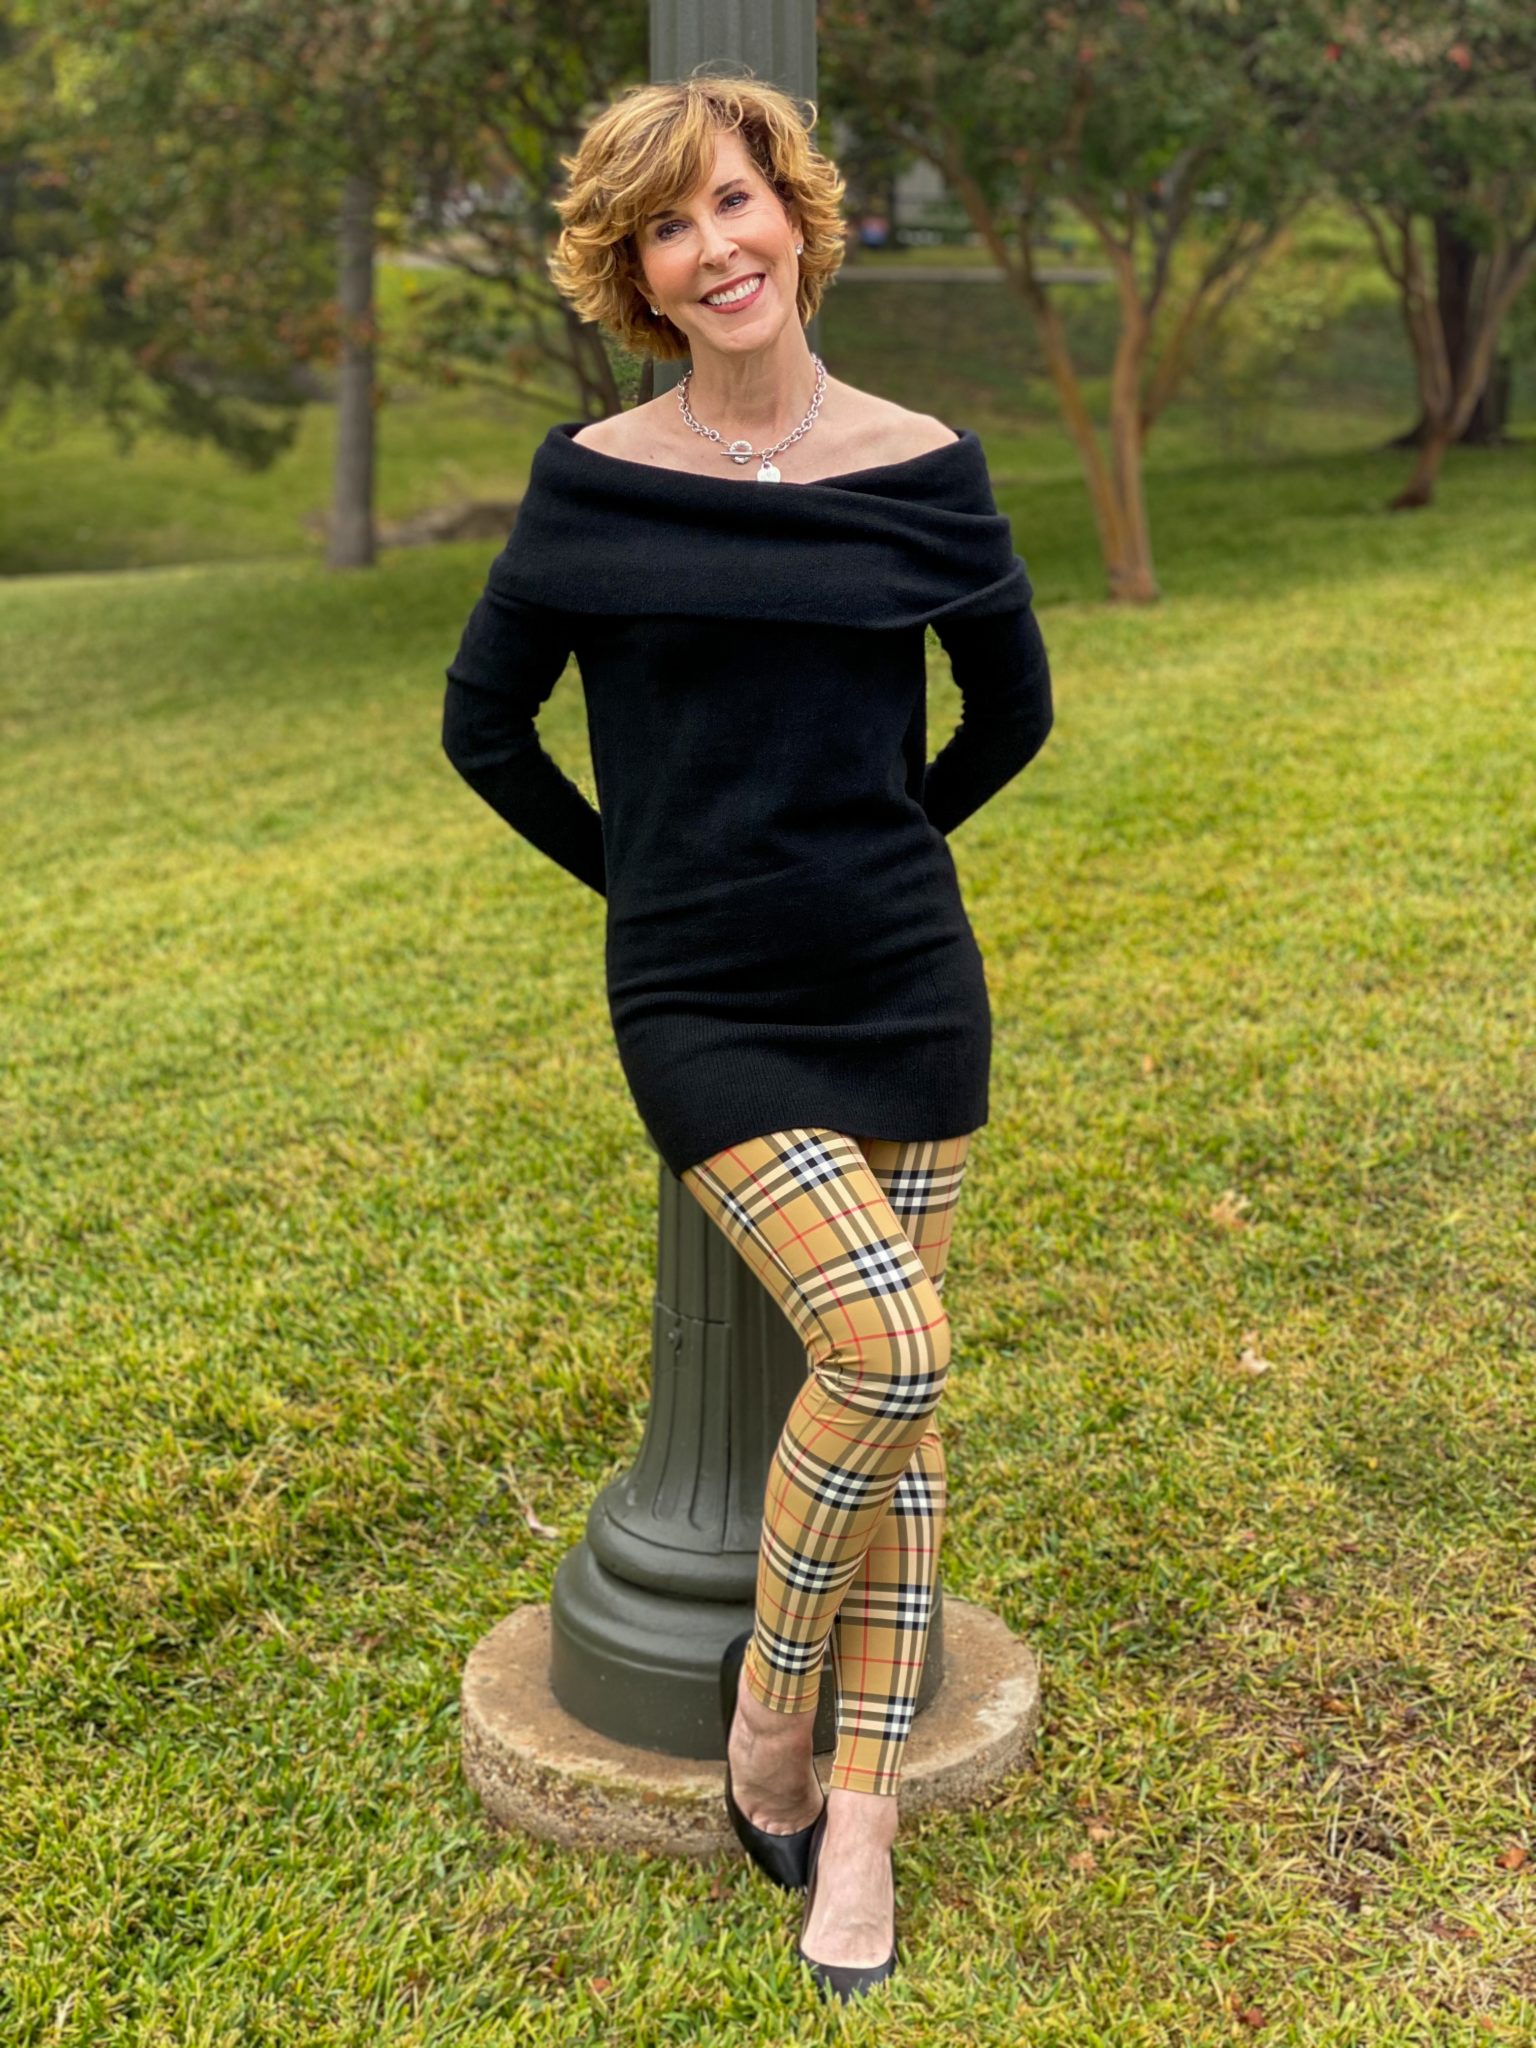 woman over 50 wearing a black off the shoulder sweater and burberry leggings and black pumps leaning back against a green lamppost